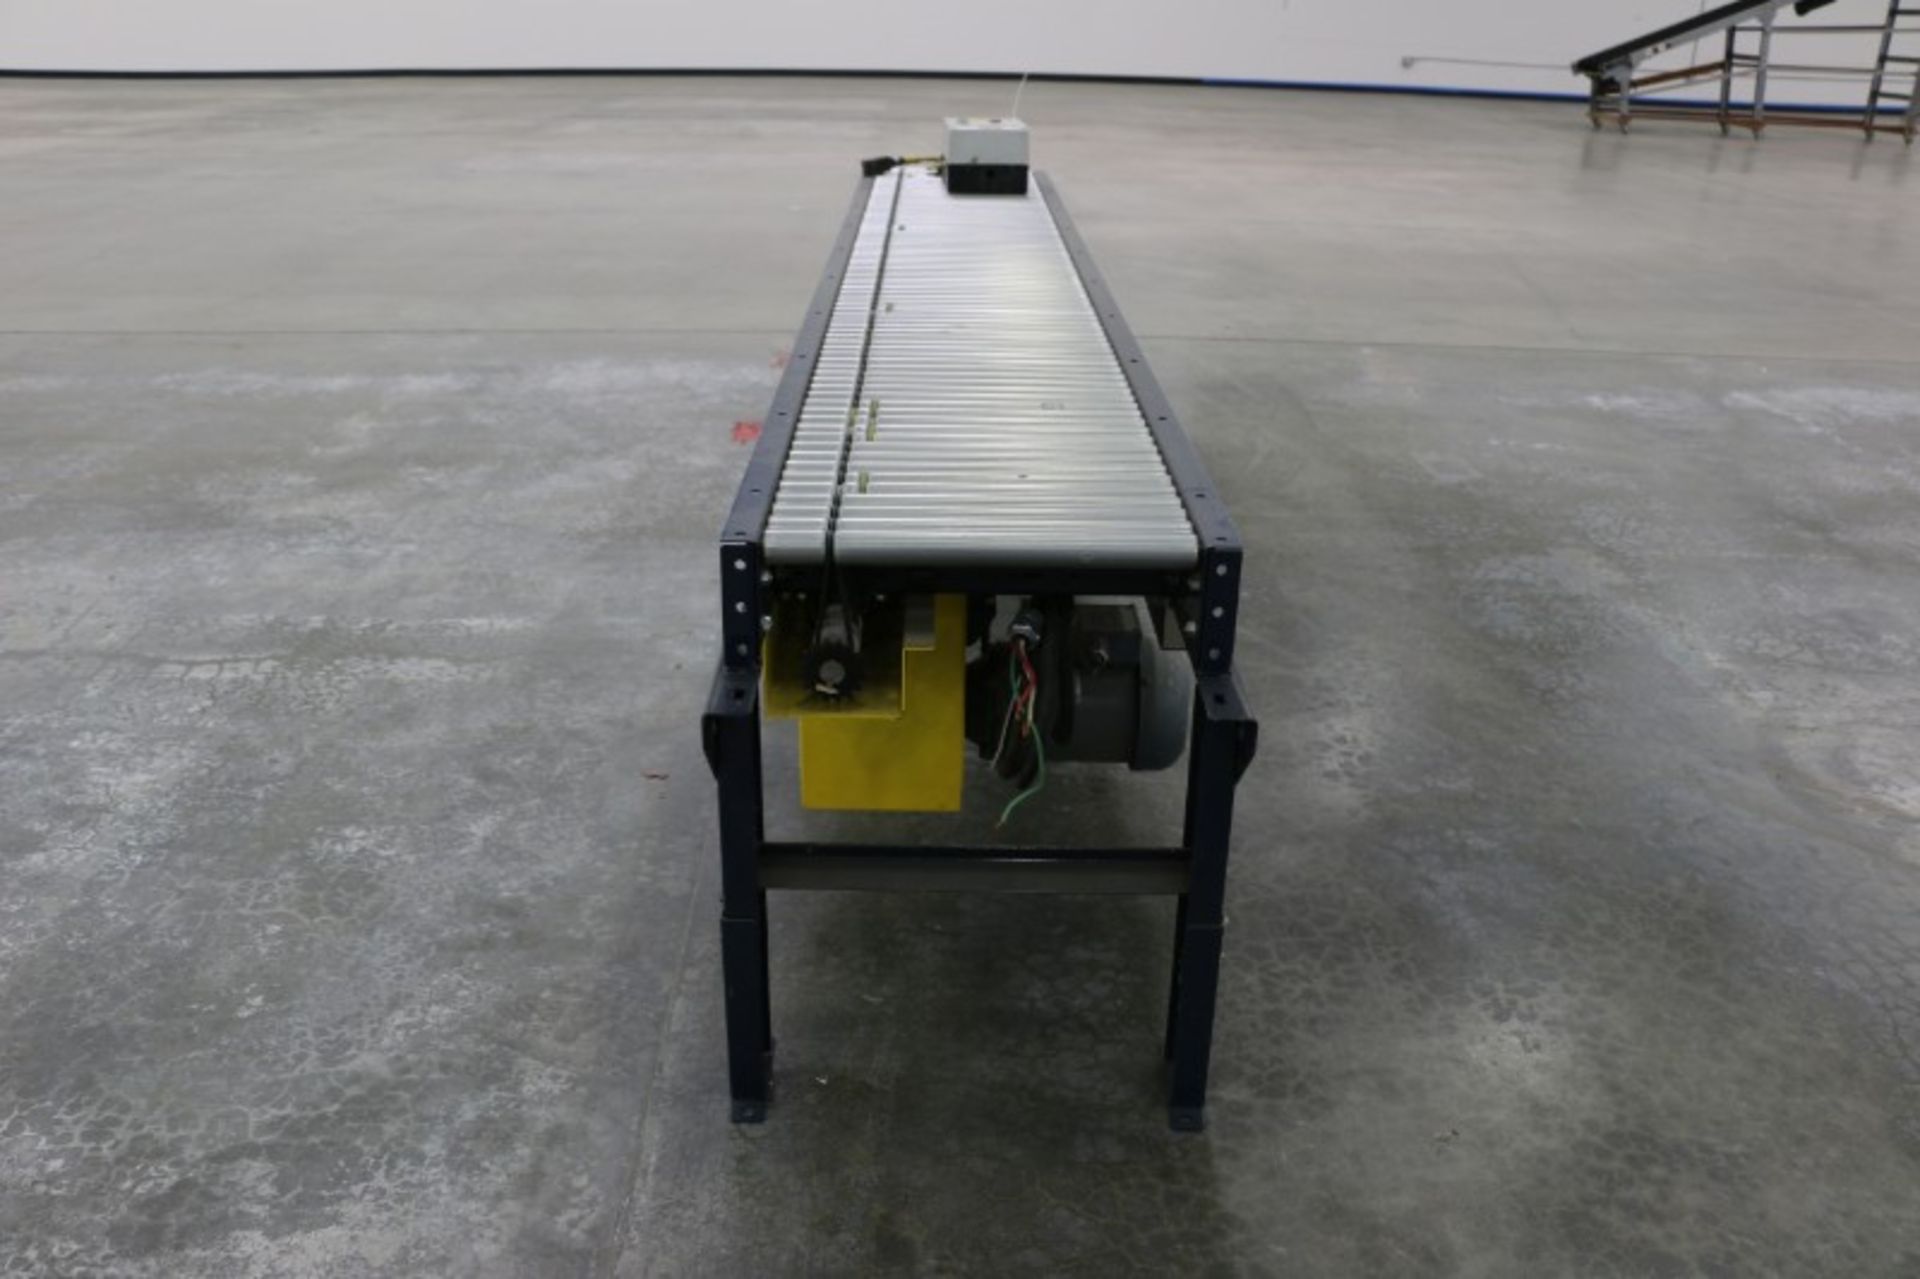 (3) Powered Roller Conveyer, 120"L x 20"W, 1 speed control, each with electric motor